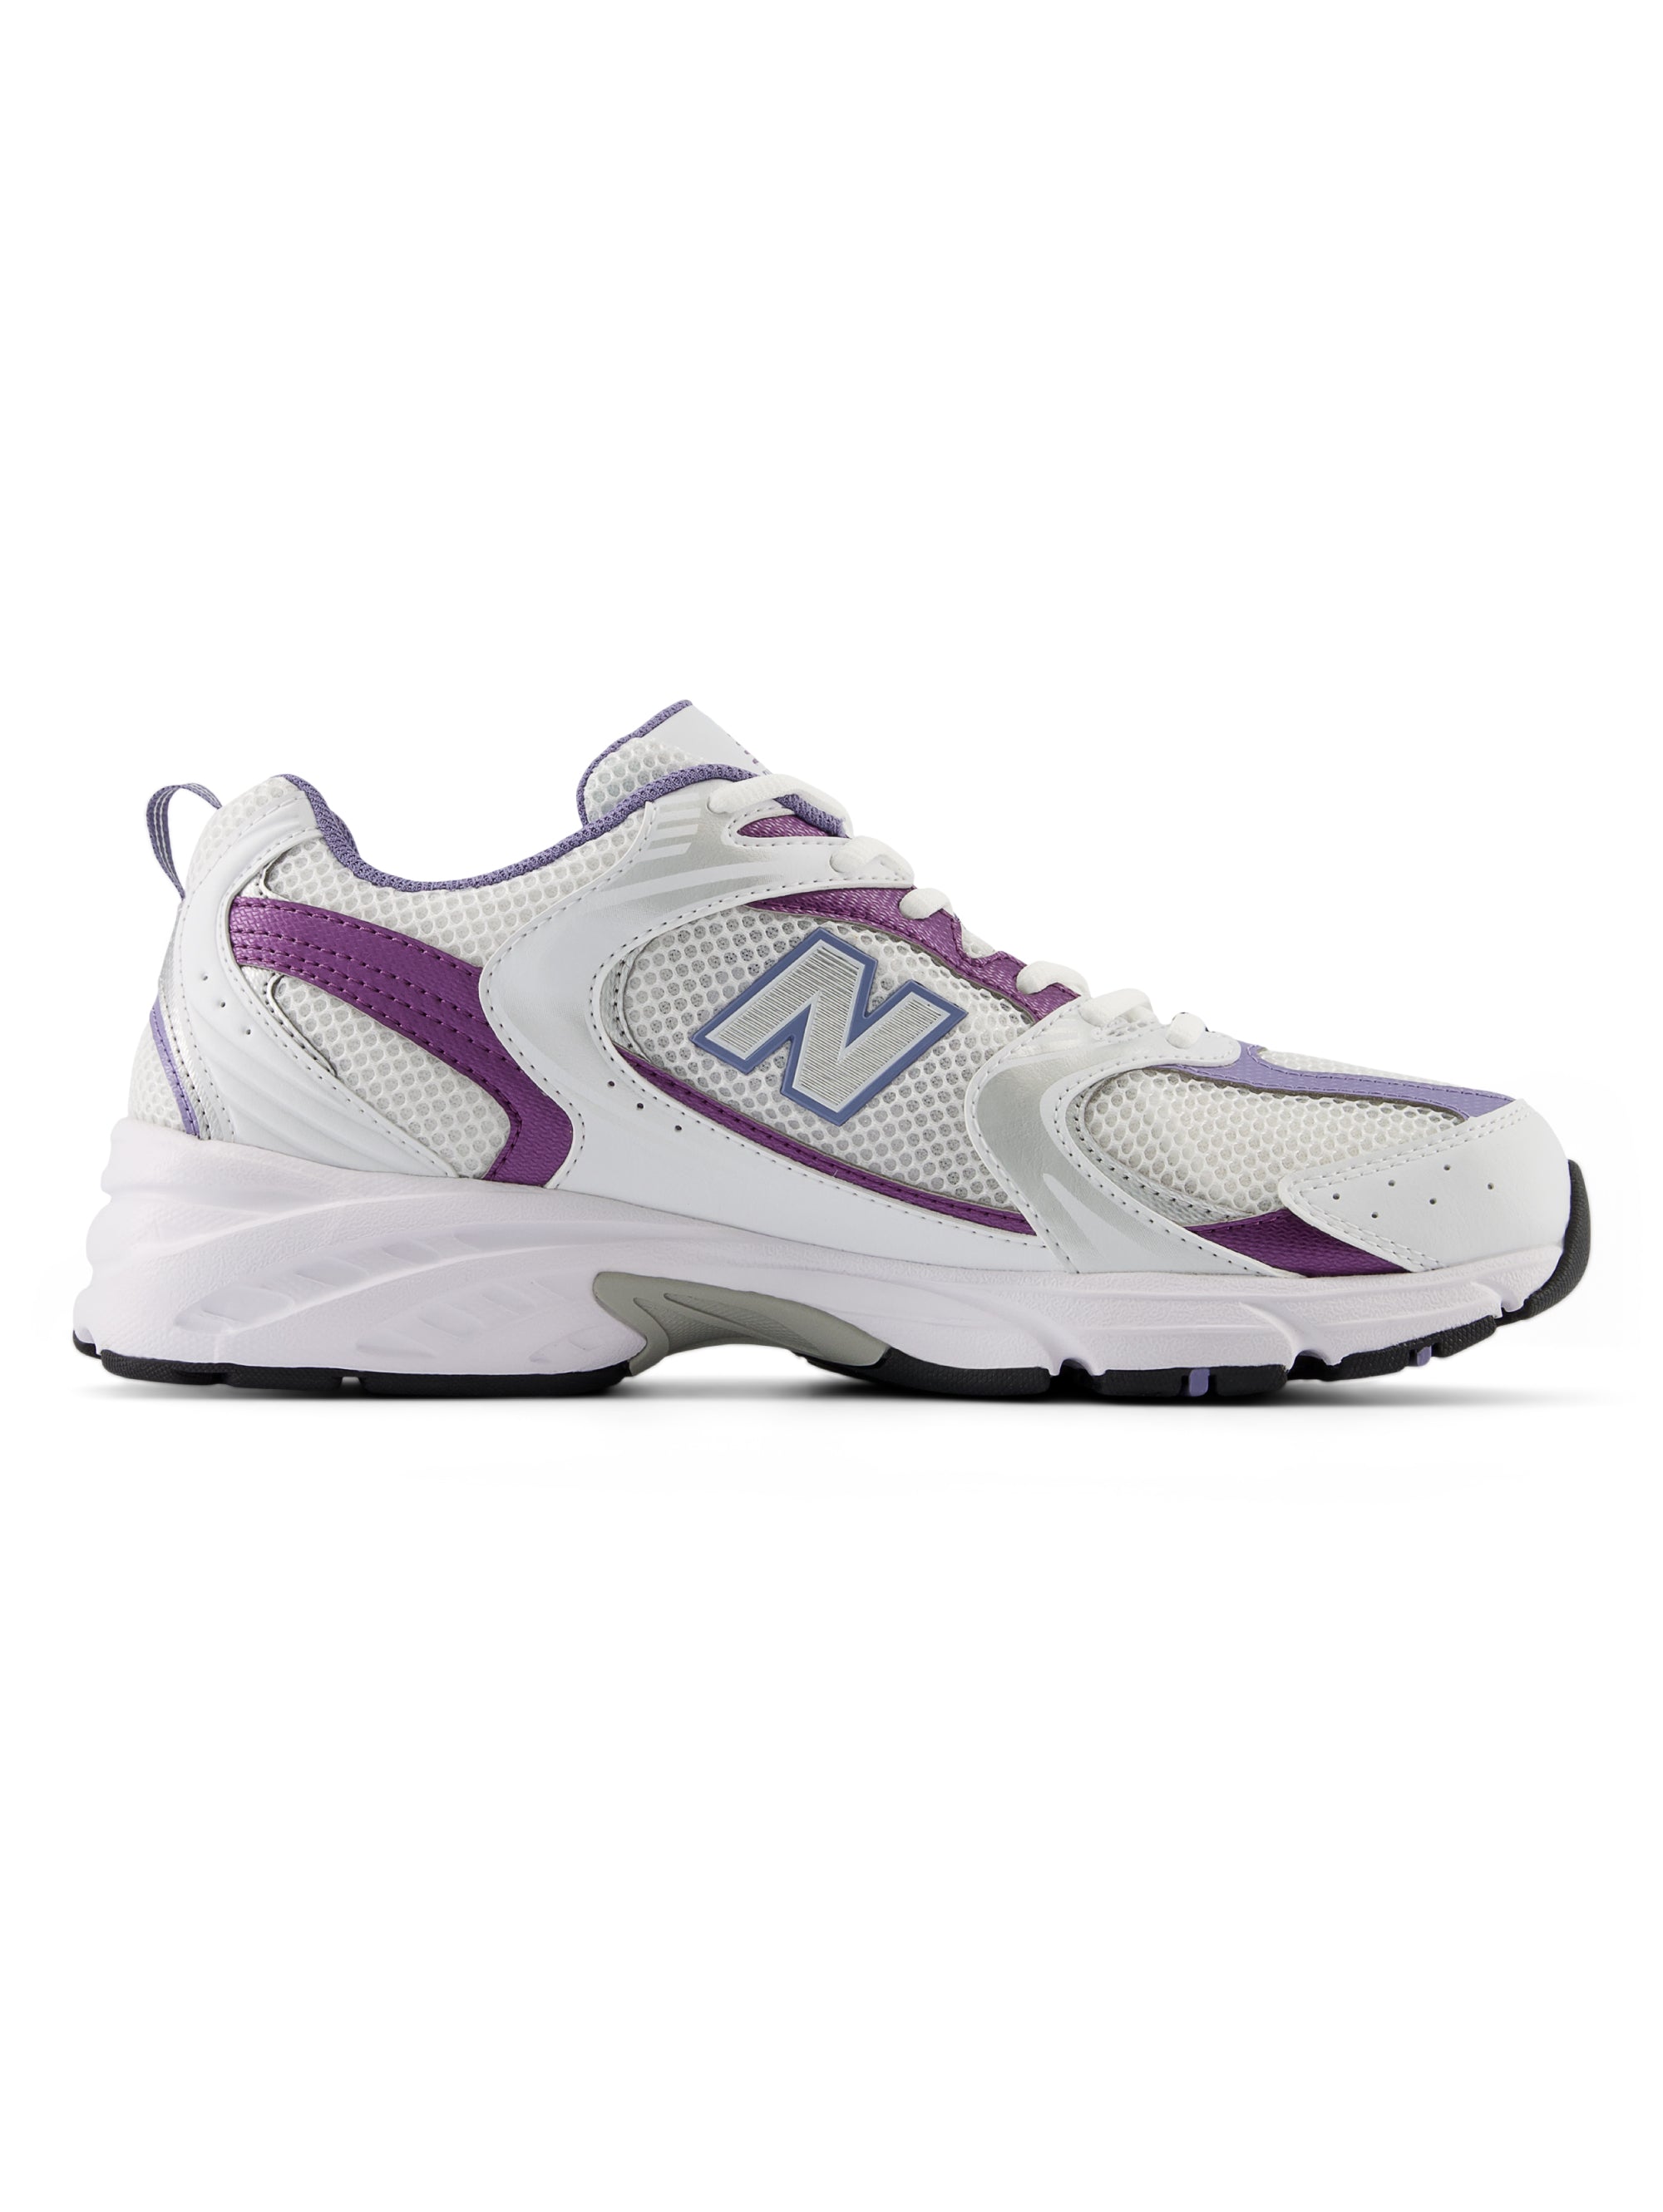 530 Sneakers for Women Lifestyle Reflection White/Purple